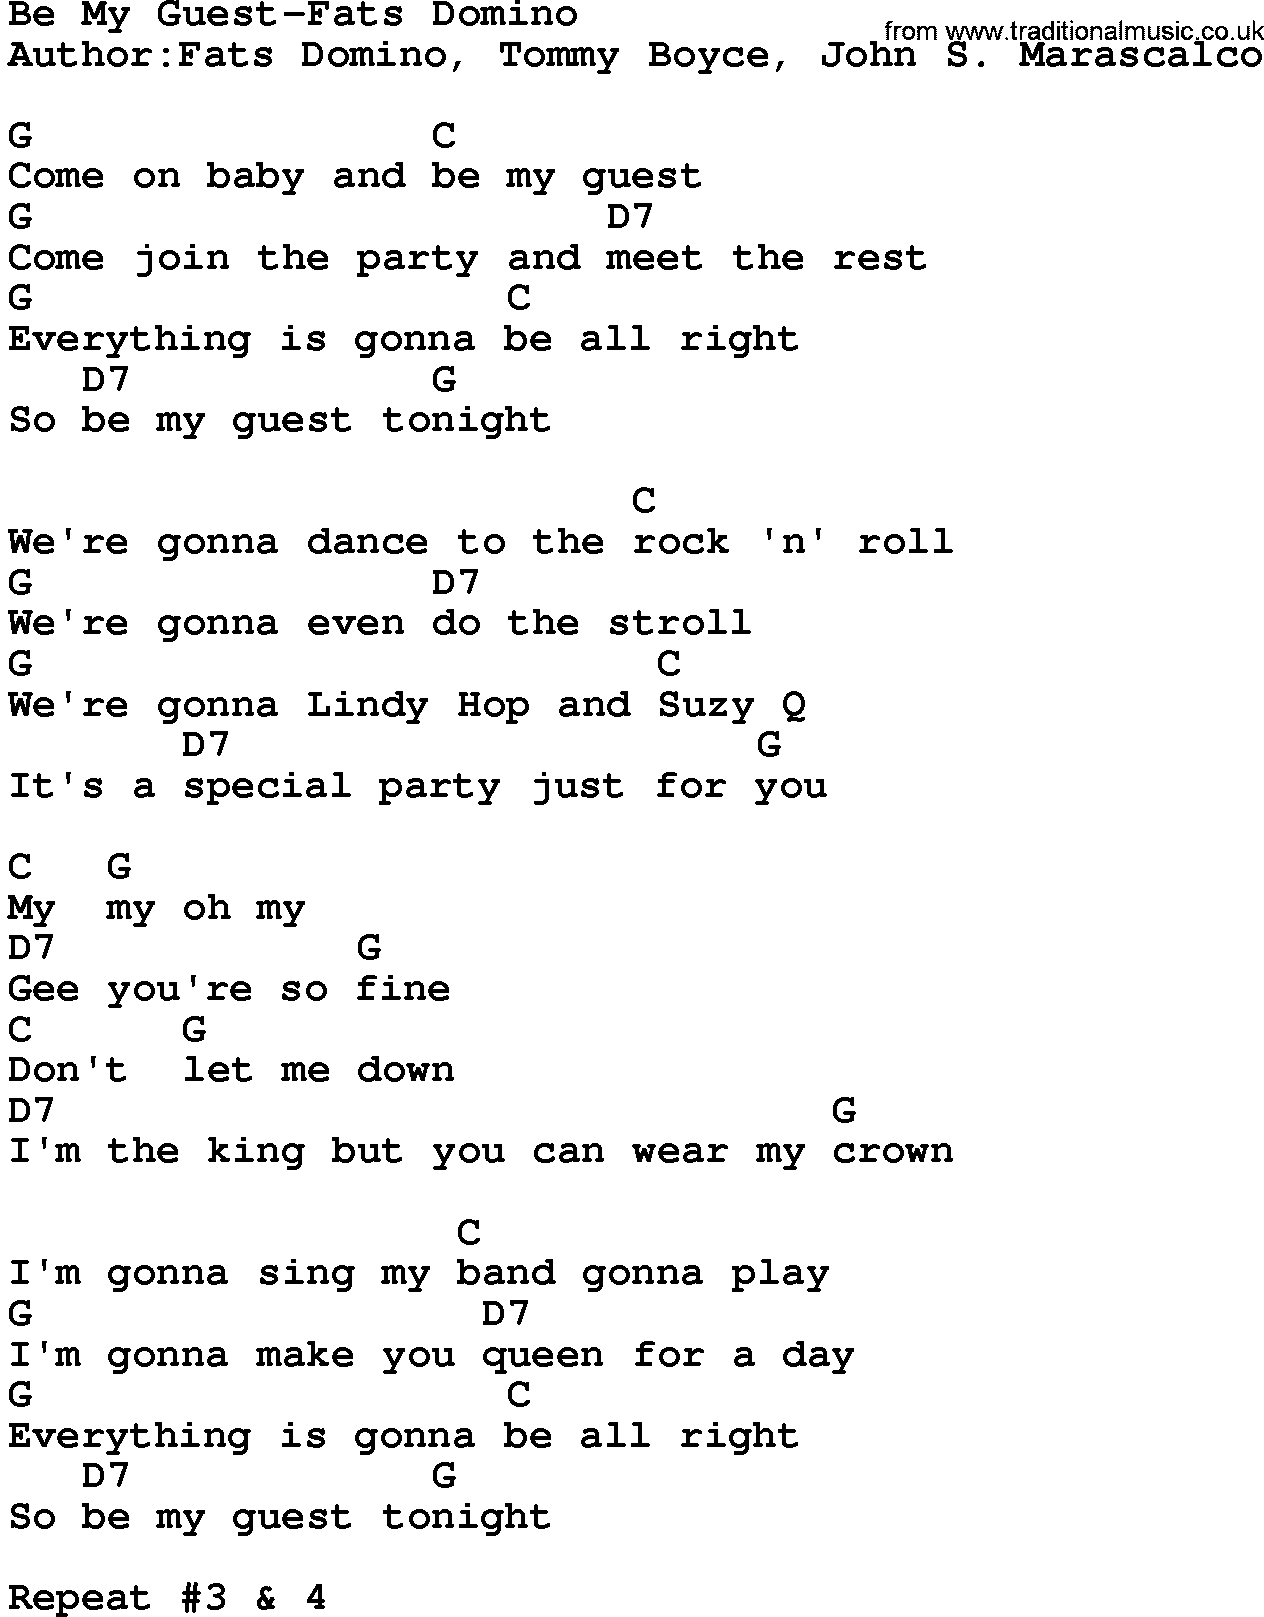 Country music song: Be My Guest-Fats Domino lyrics and chords